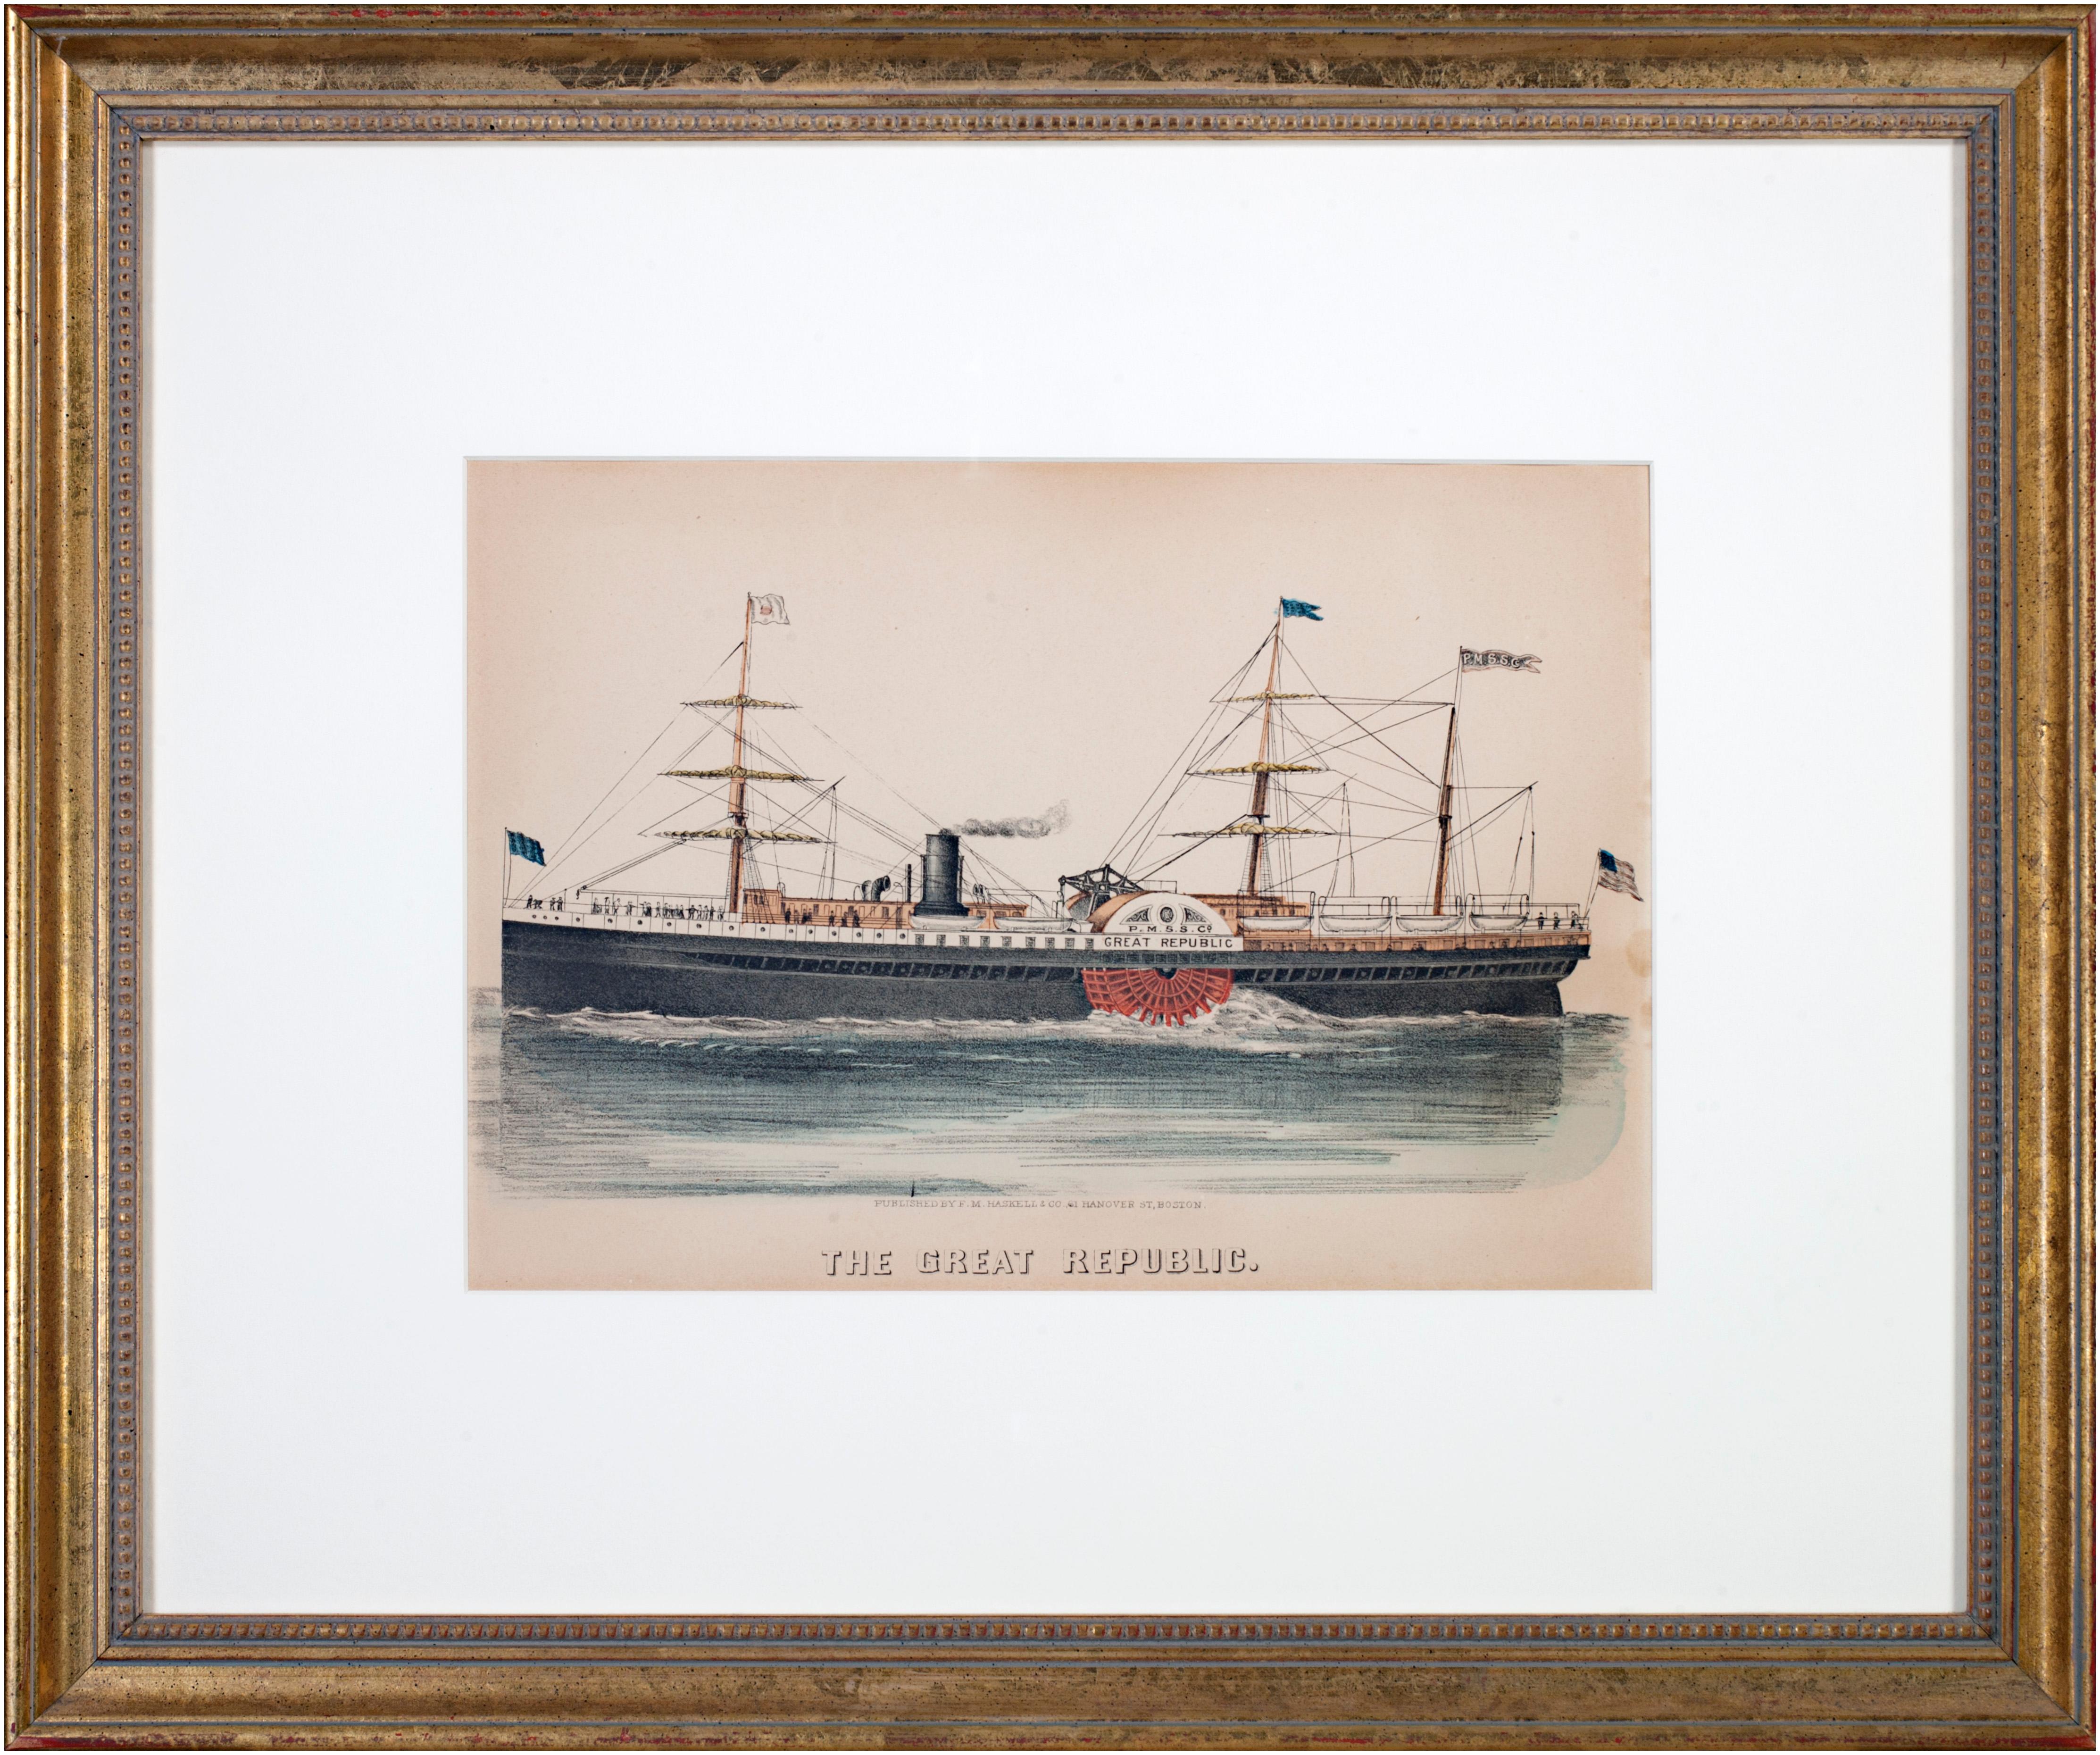 F.M. Haskell & Co. Print - 'The Great Republic' original hand-colored lithograph of steamship